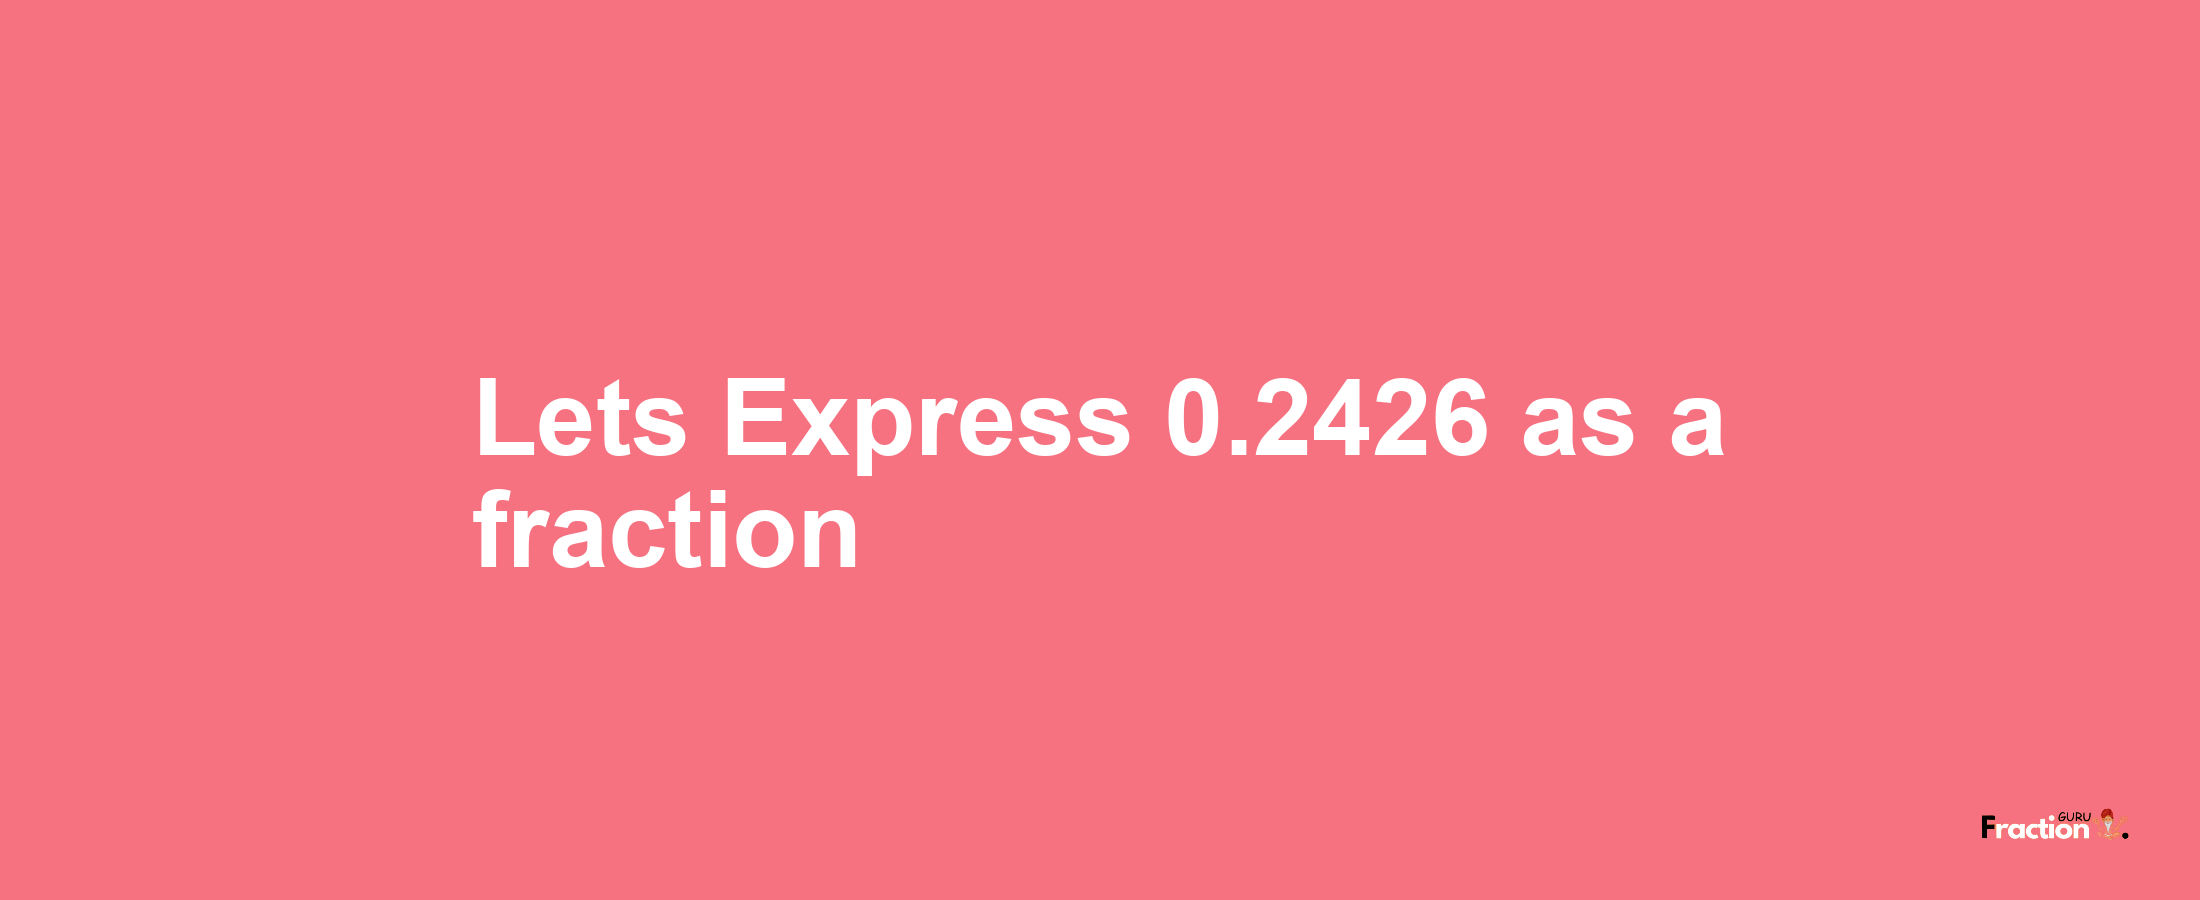 Lets Express 0.2426 as afraction